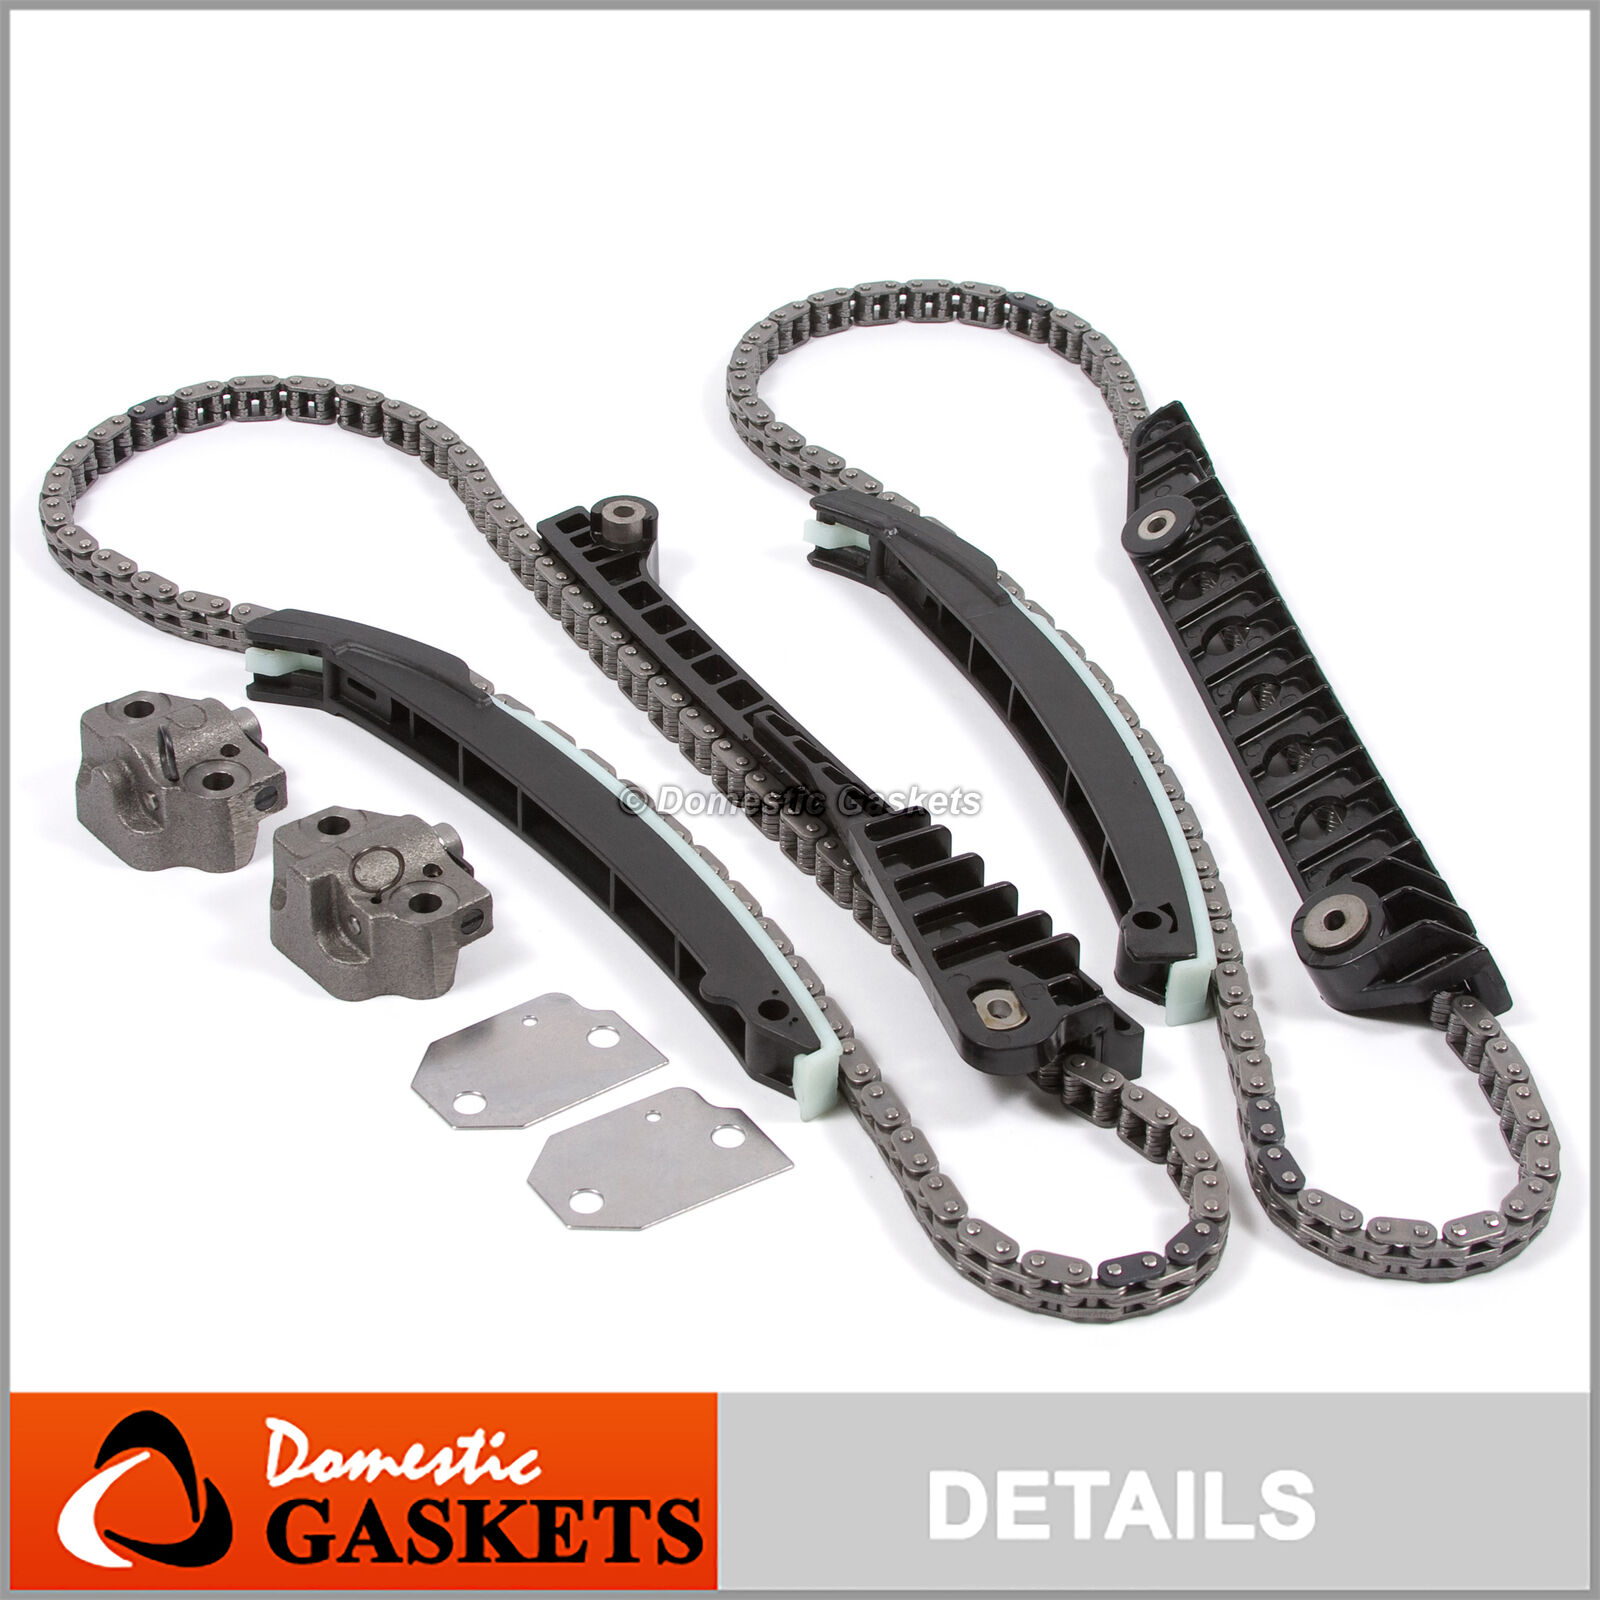 97-11 Ford E-Series F-Series Expedition Excursion 5.4L Timing Chain Kit-no gears